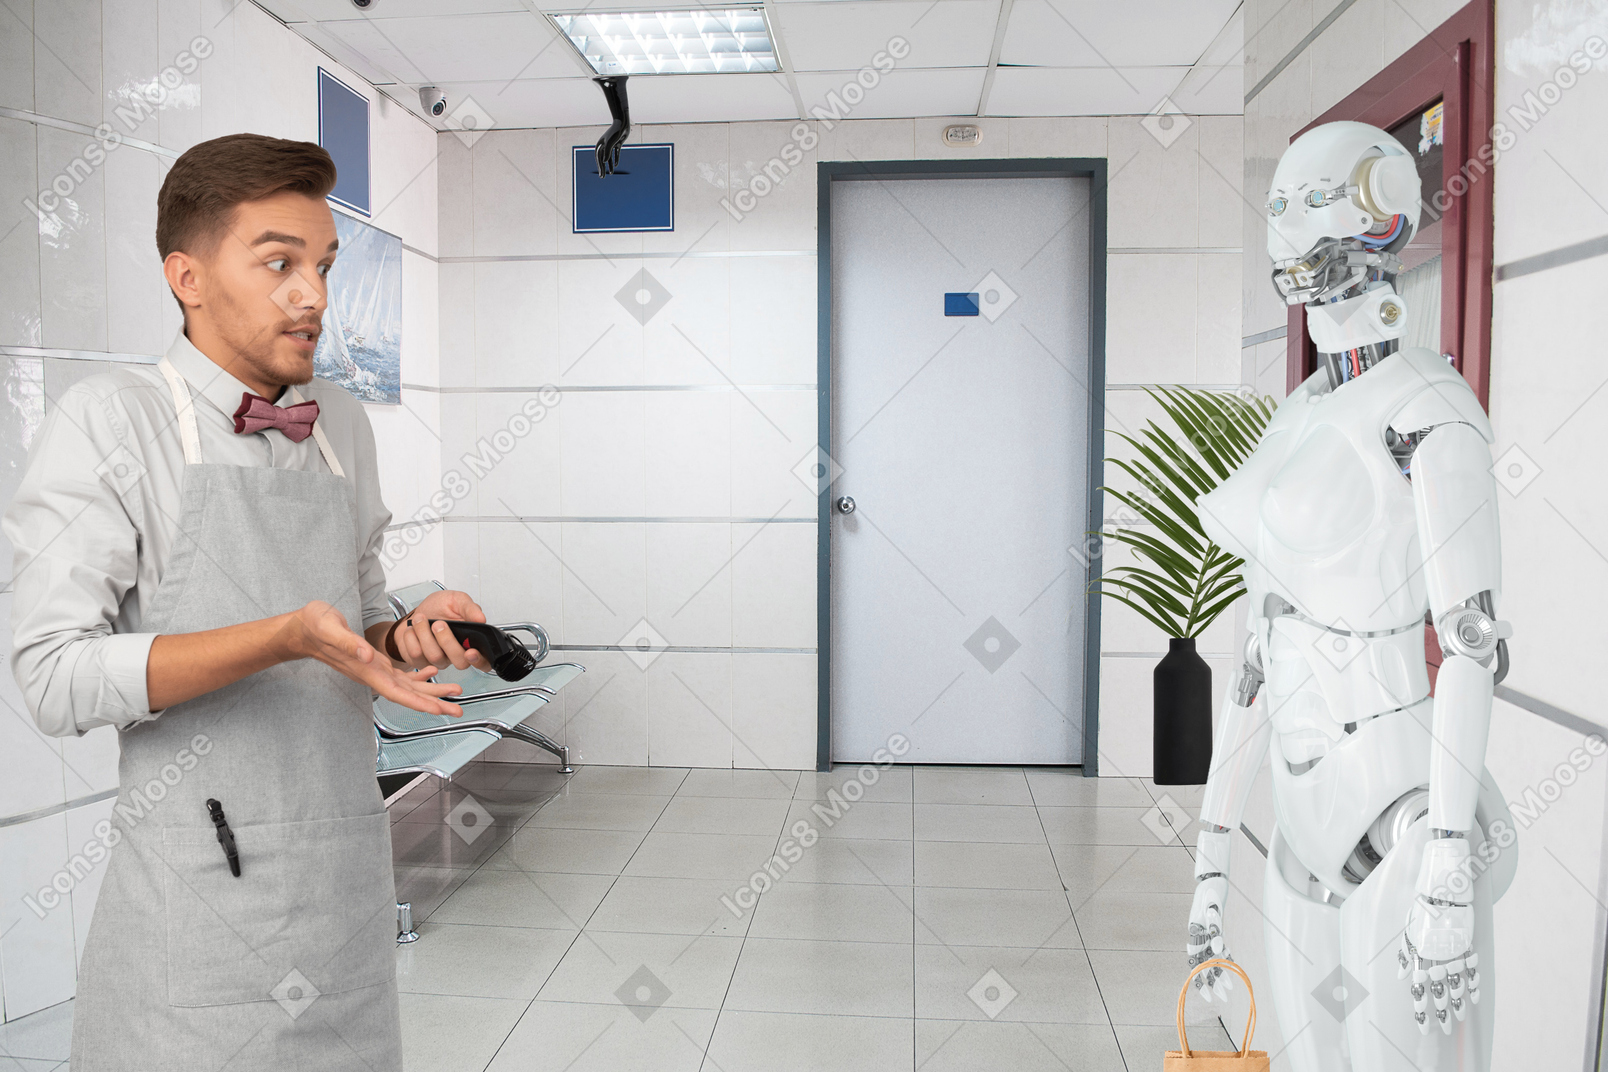 A man standing next to a robot in a room